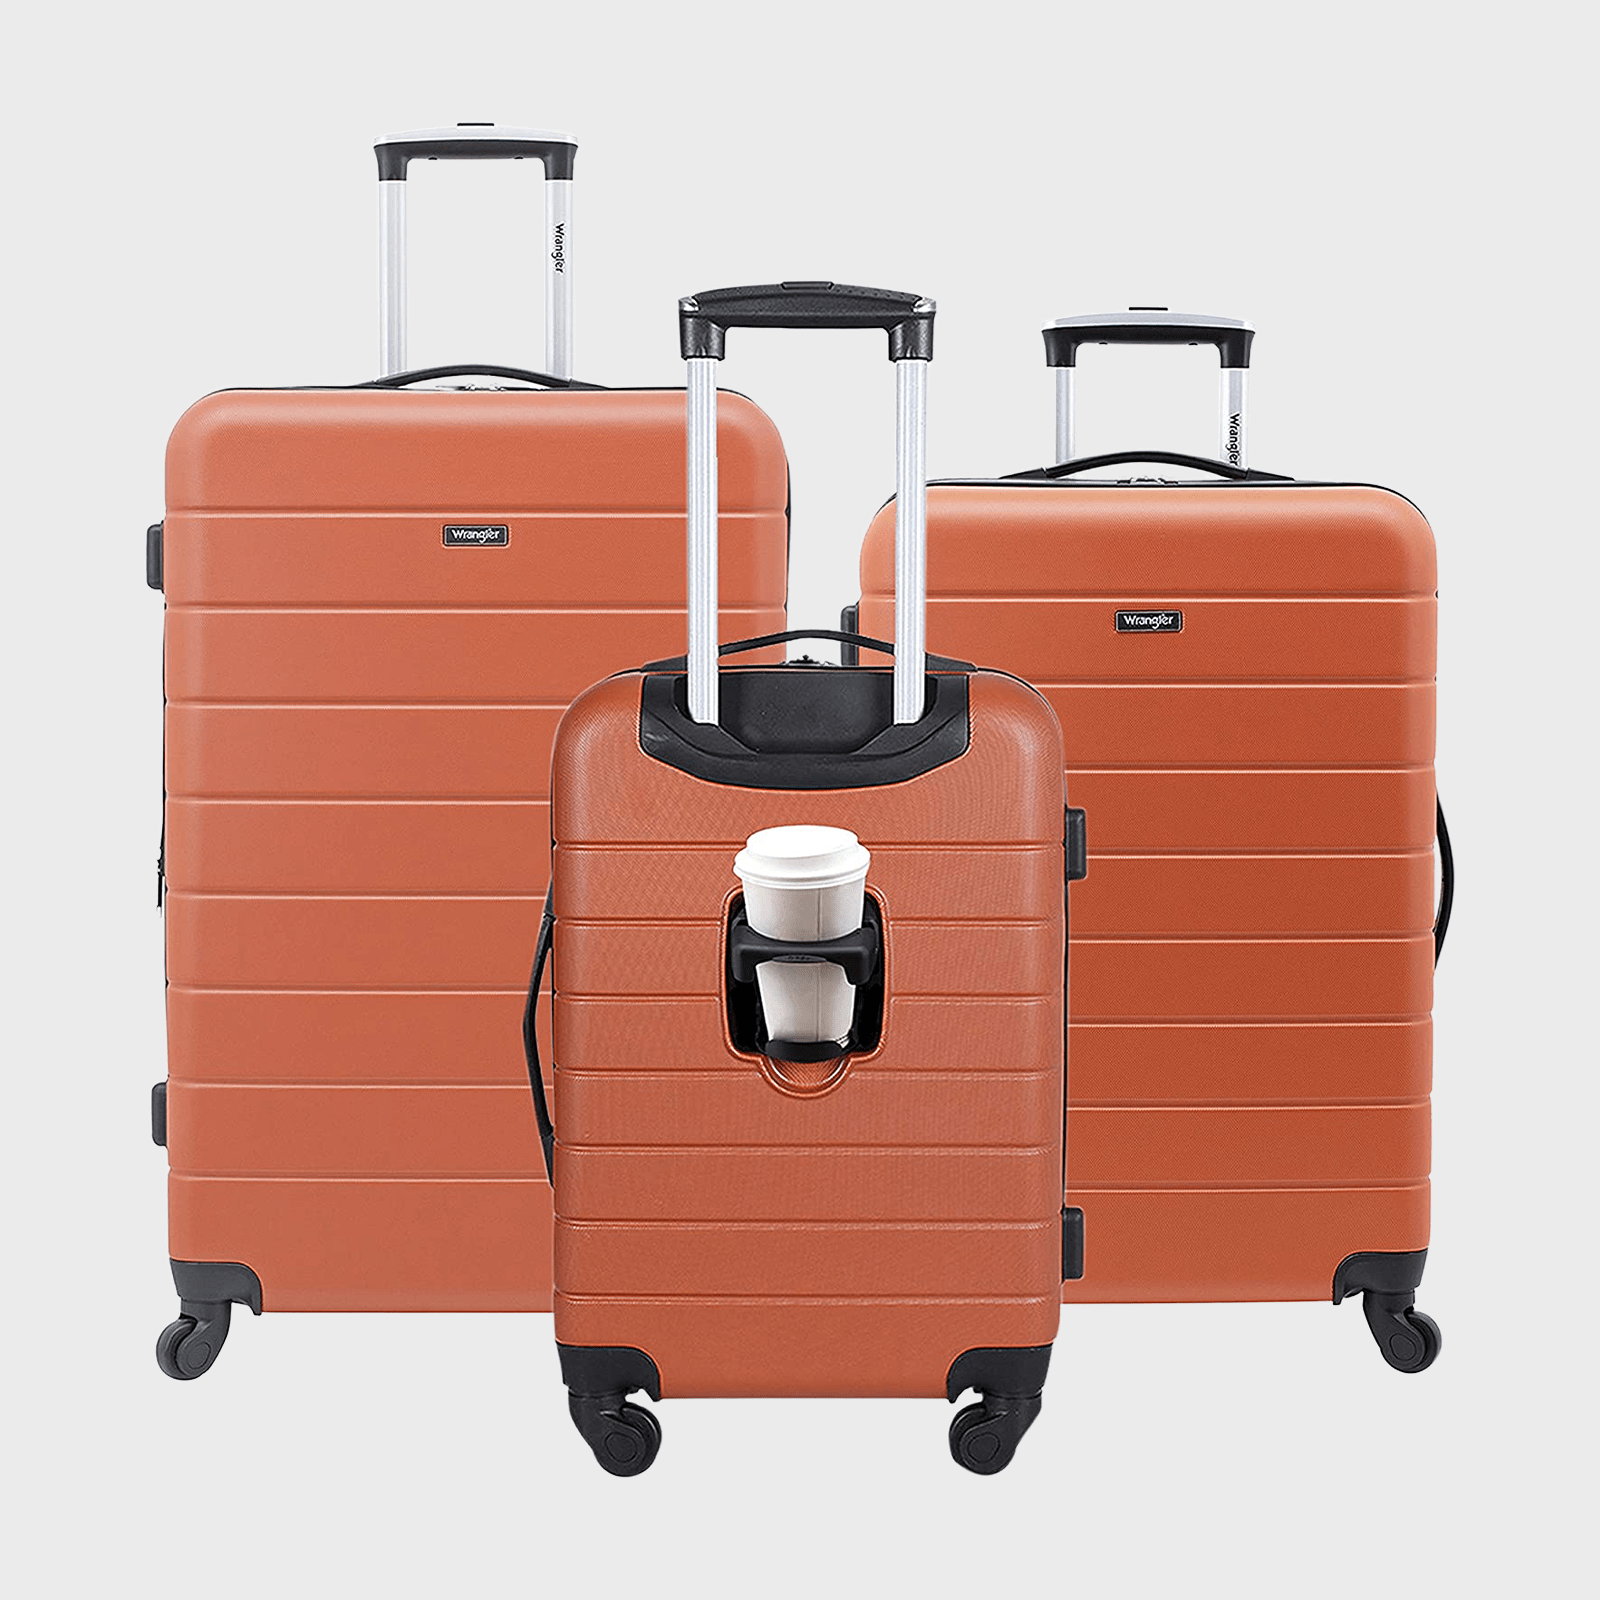 The 7 Best Luggage Sets of 2022 - Luggage Set Reviews